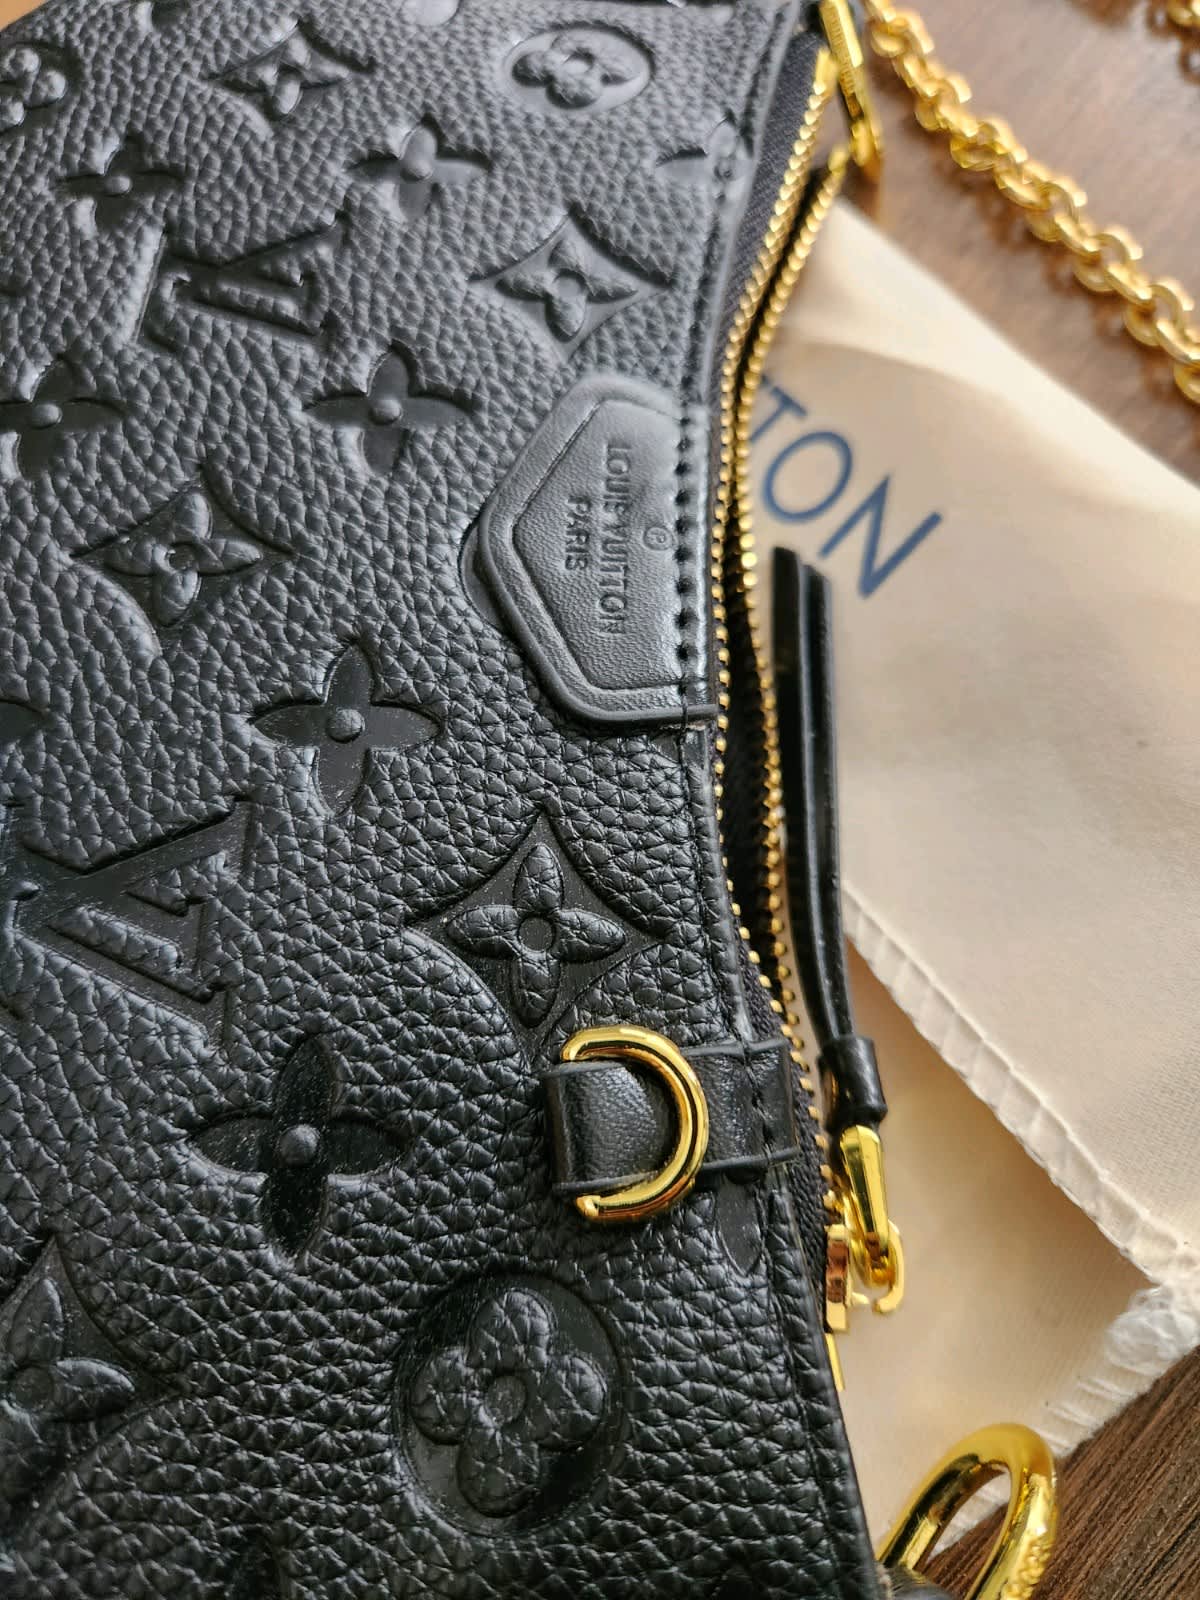 Dior Book Tote vs LV Neverfull, Gallery posted by Revisia